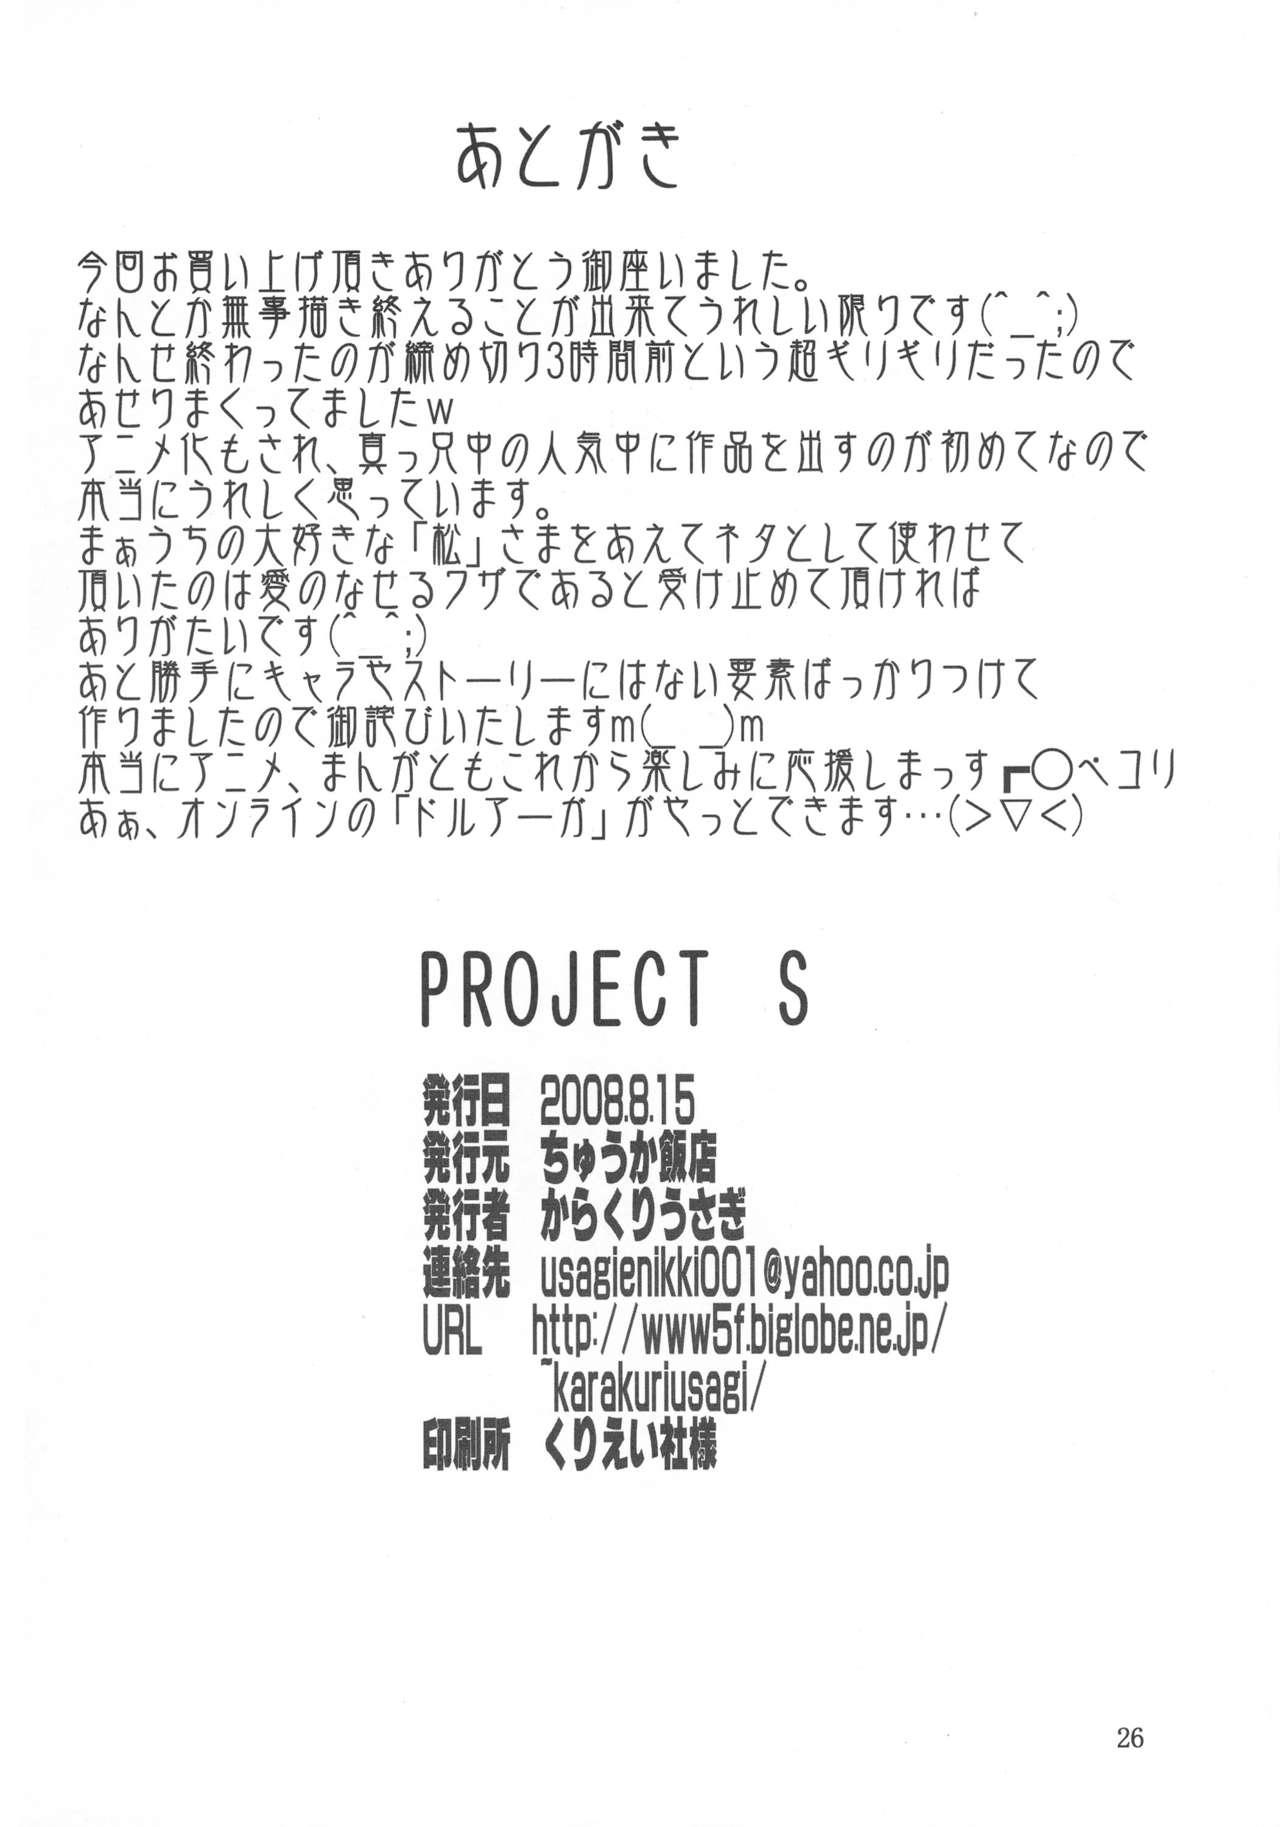 PROJECT S 25